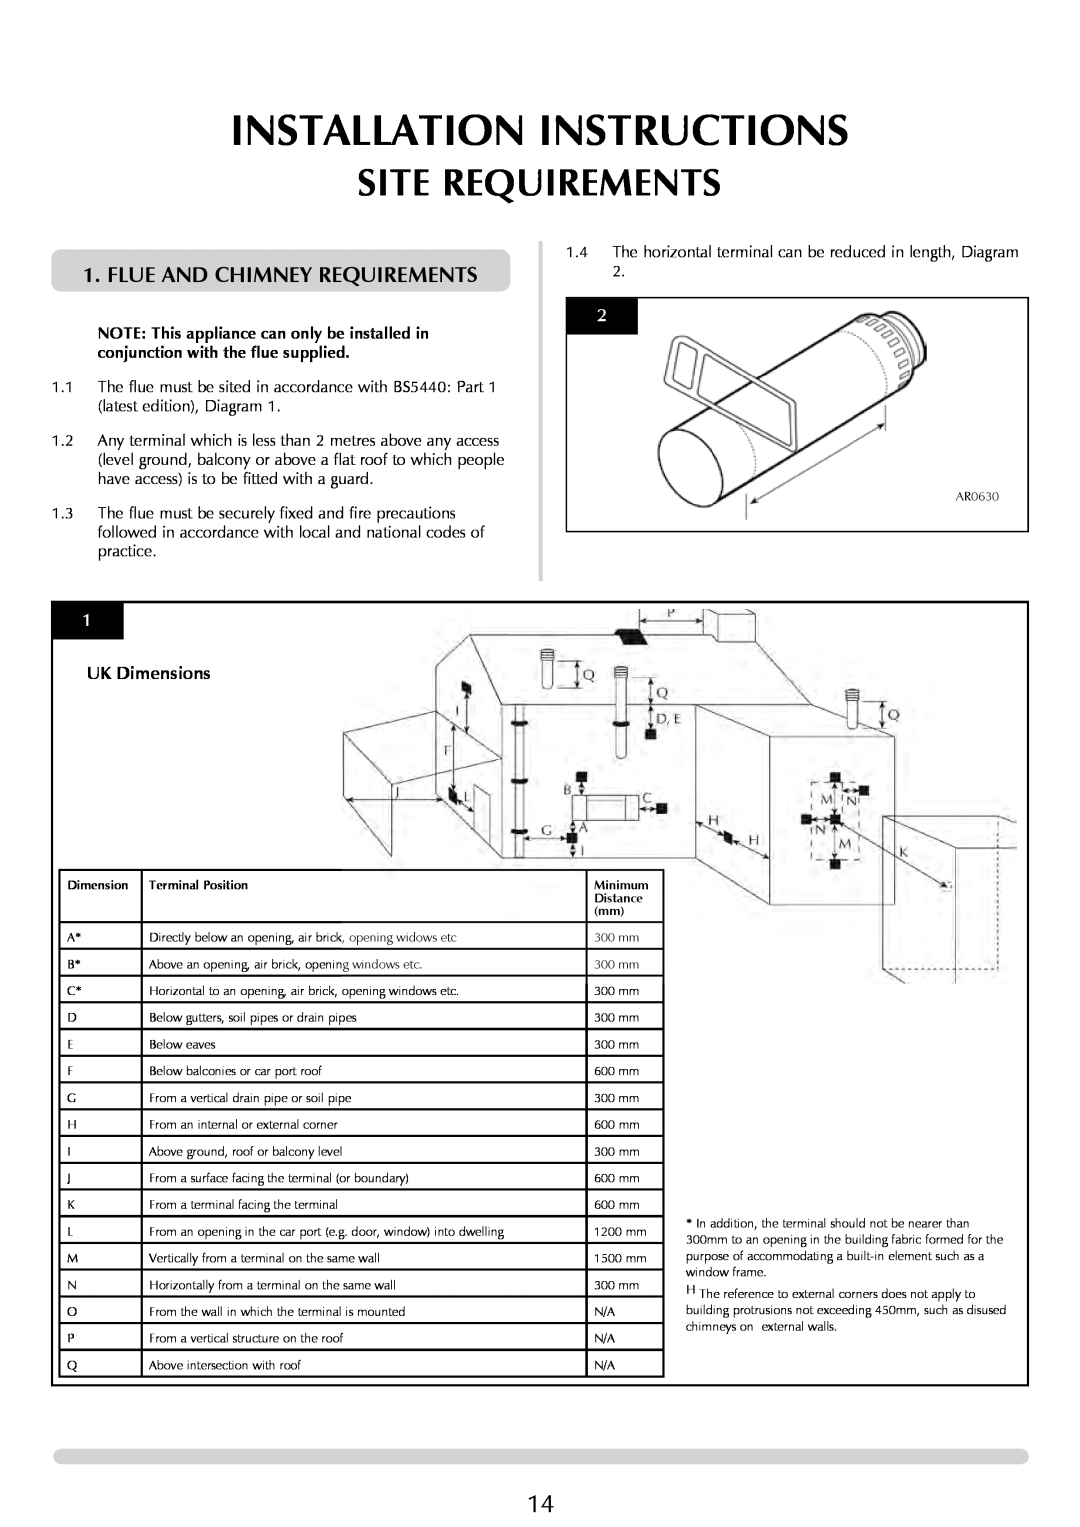 Stovax PR0776 manual Site Requirements, Flue and Chimney Requirements, UK Dimensions, Installation Instructions 